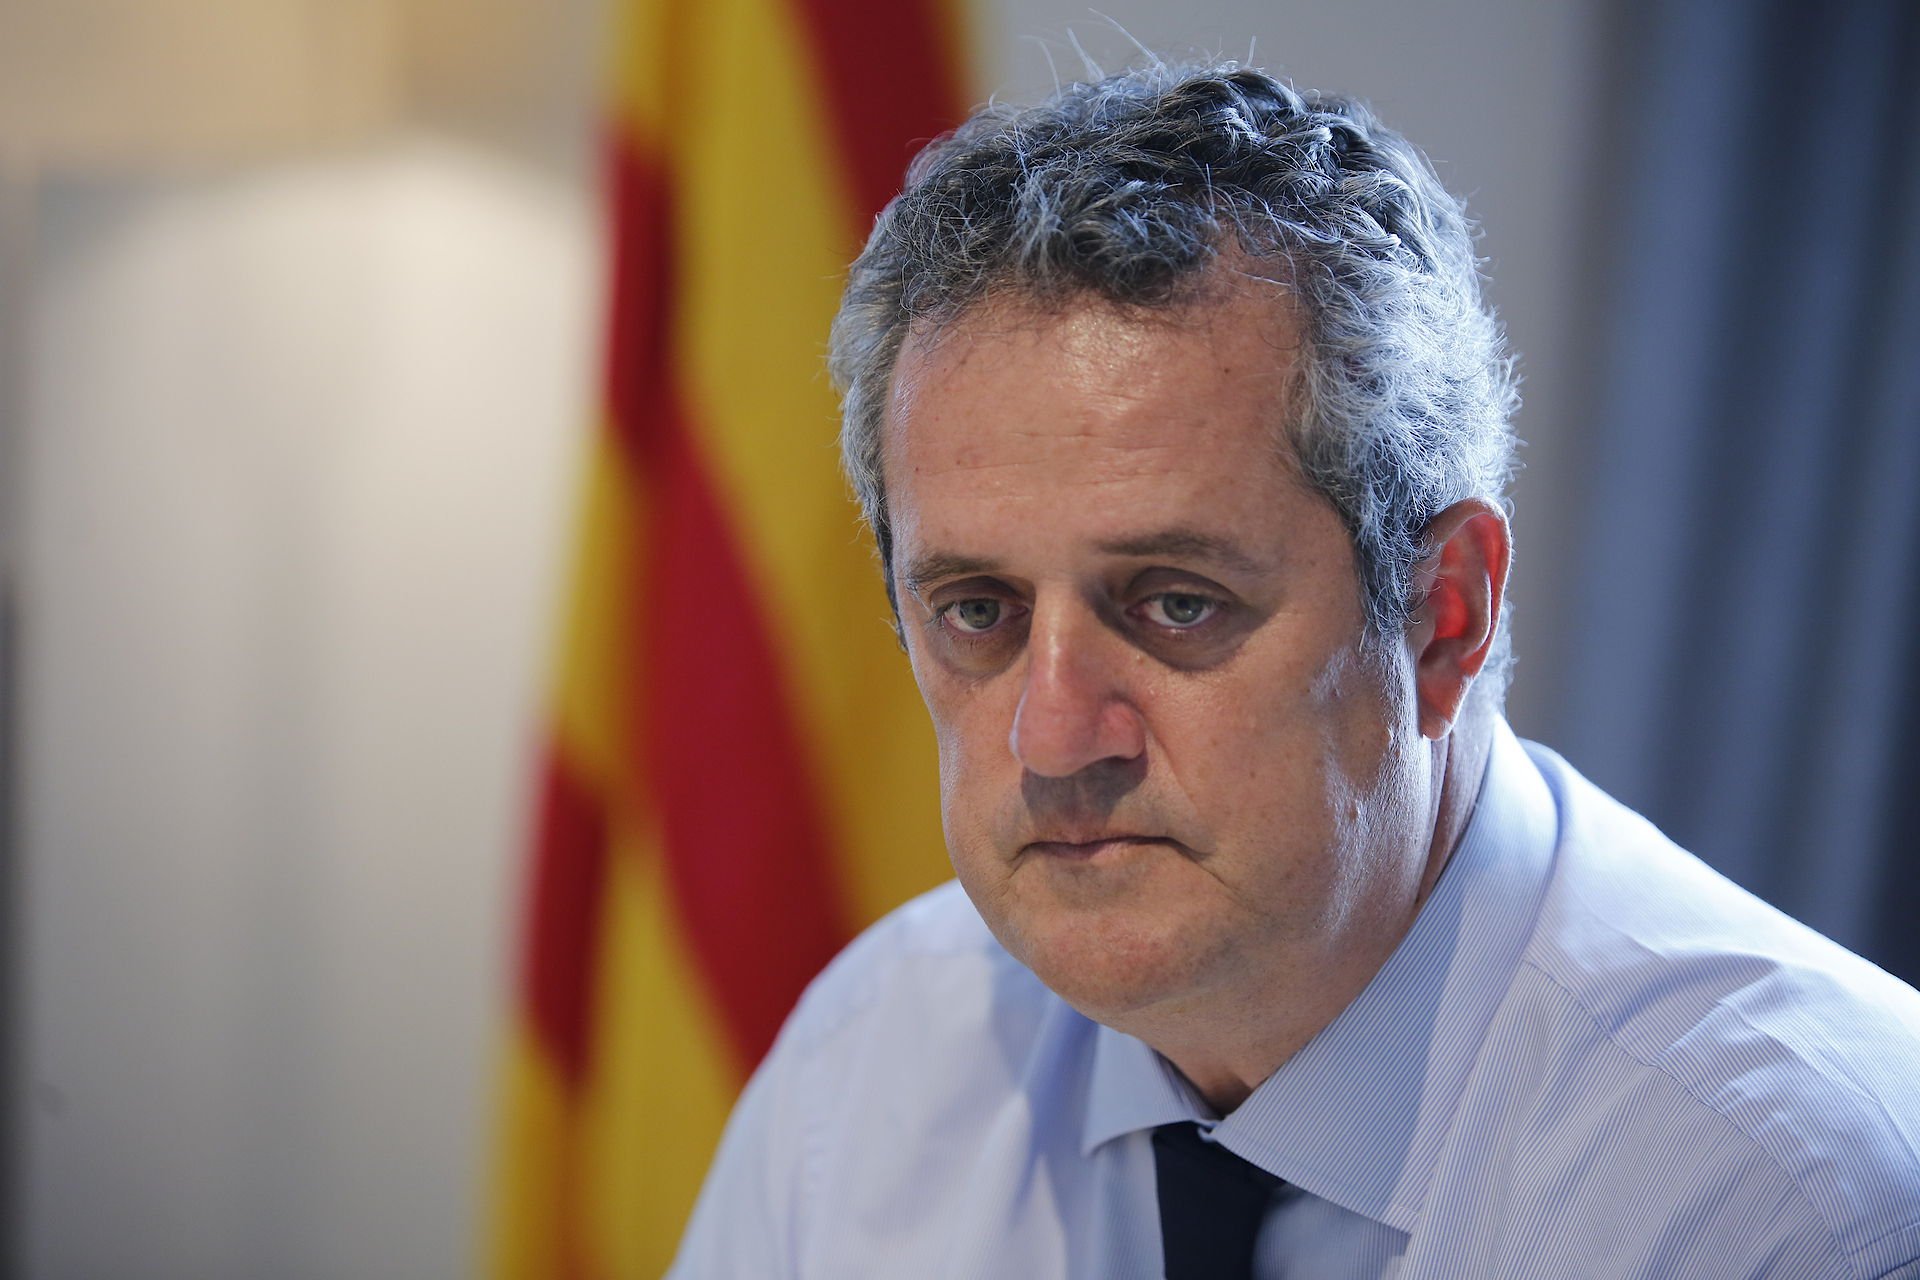 Bureaucracy tells Catalan prisoner Forn to report for election-day clerk duty